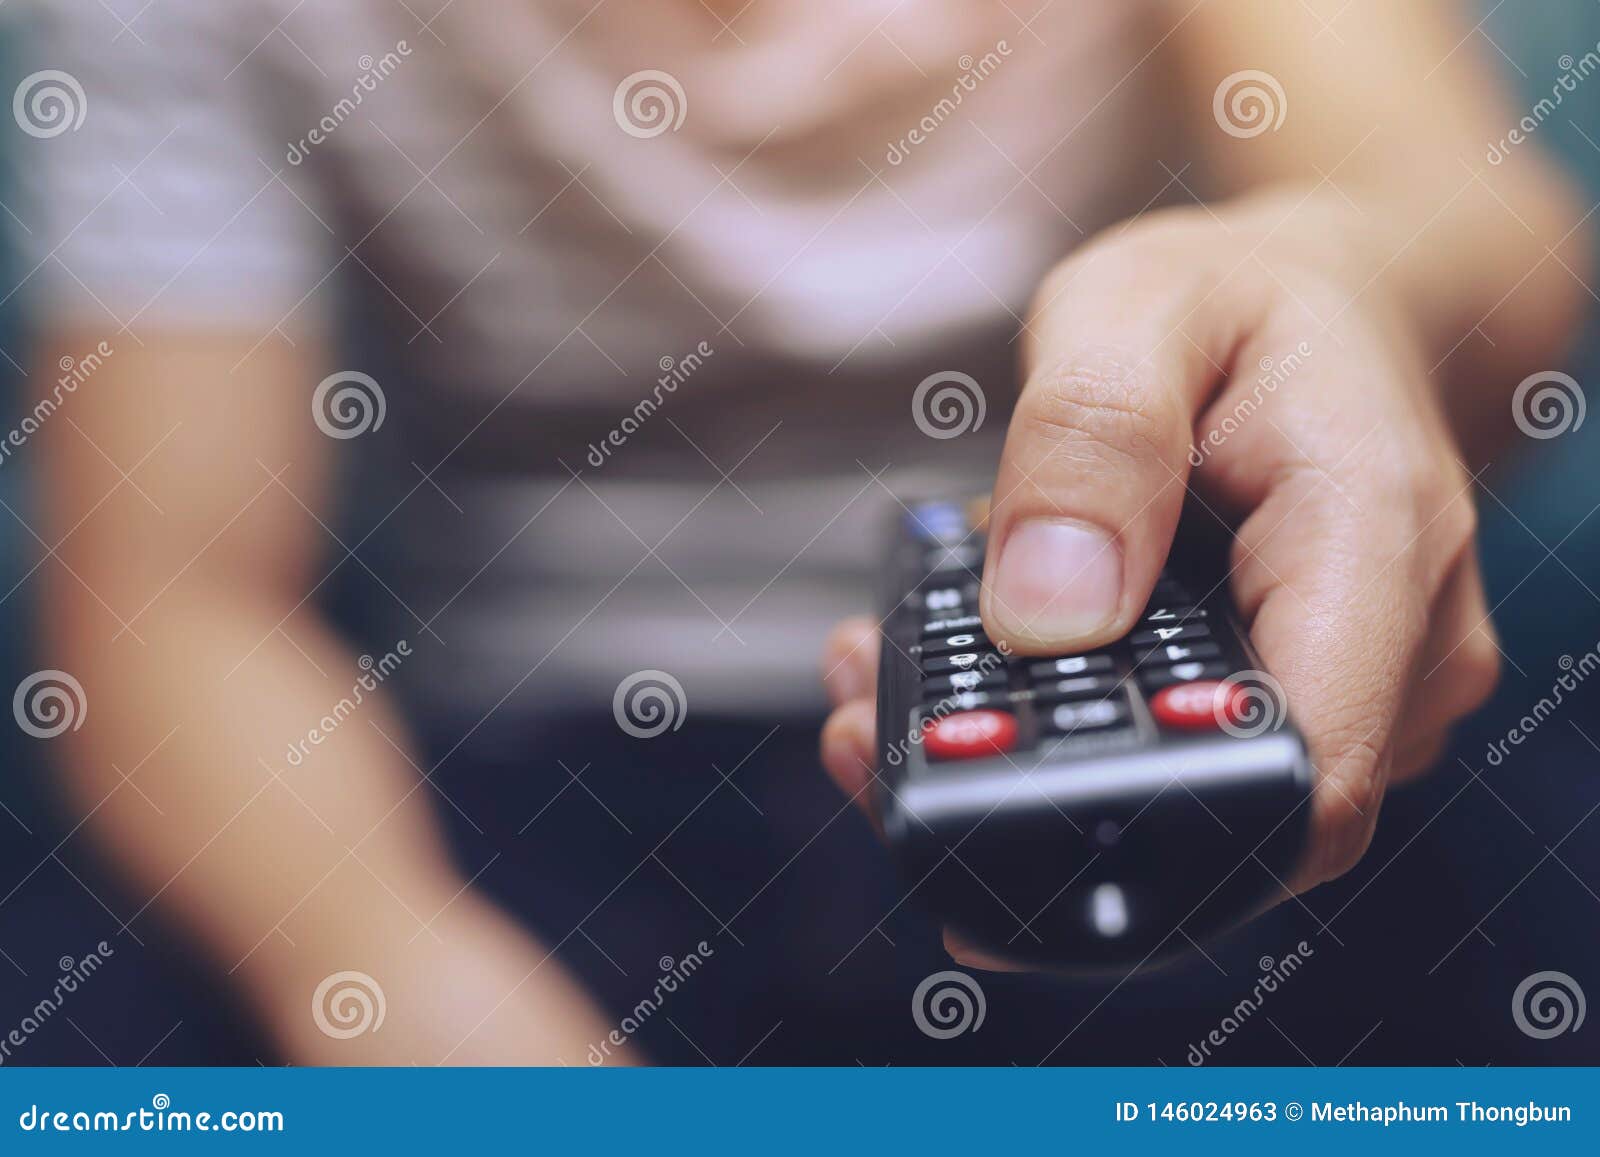 close up young man is using television remote contro